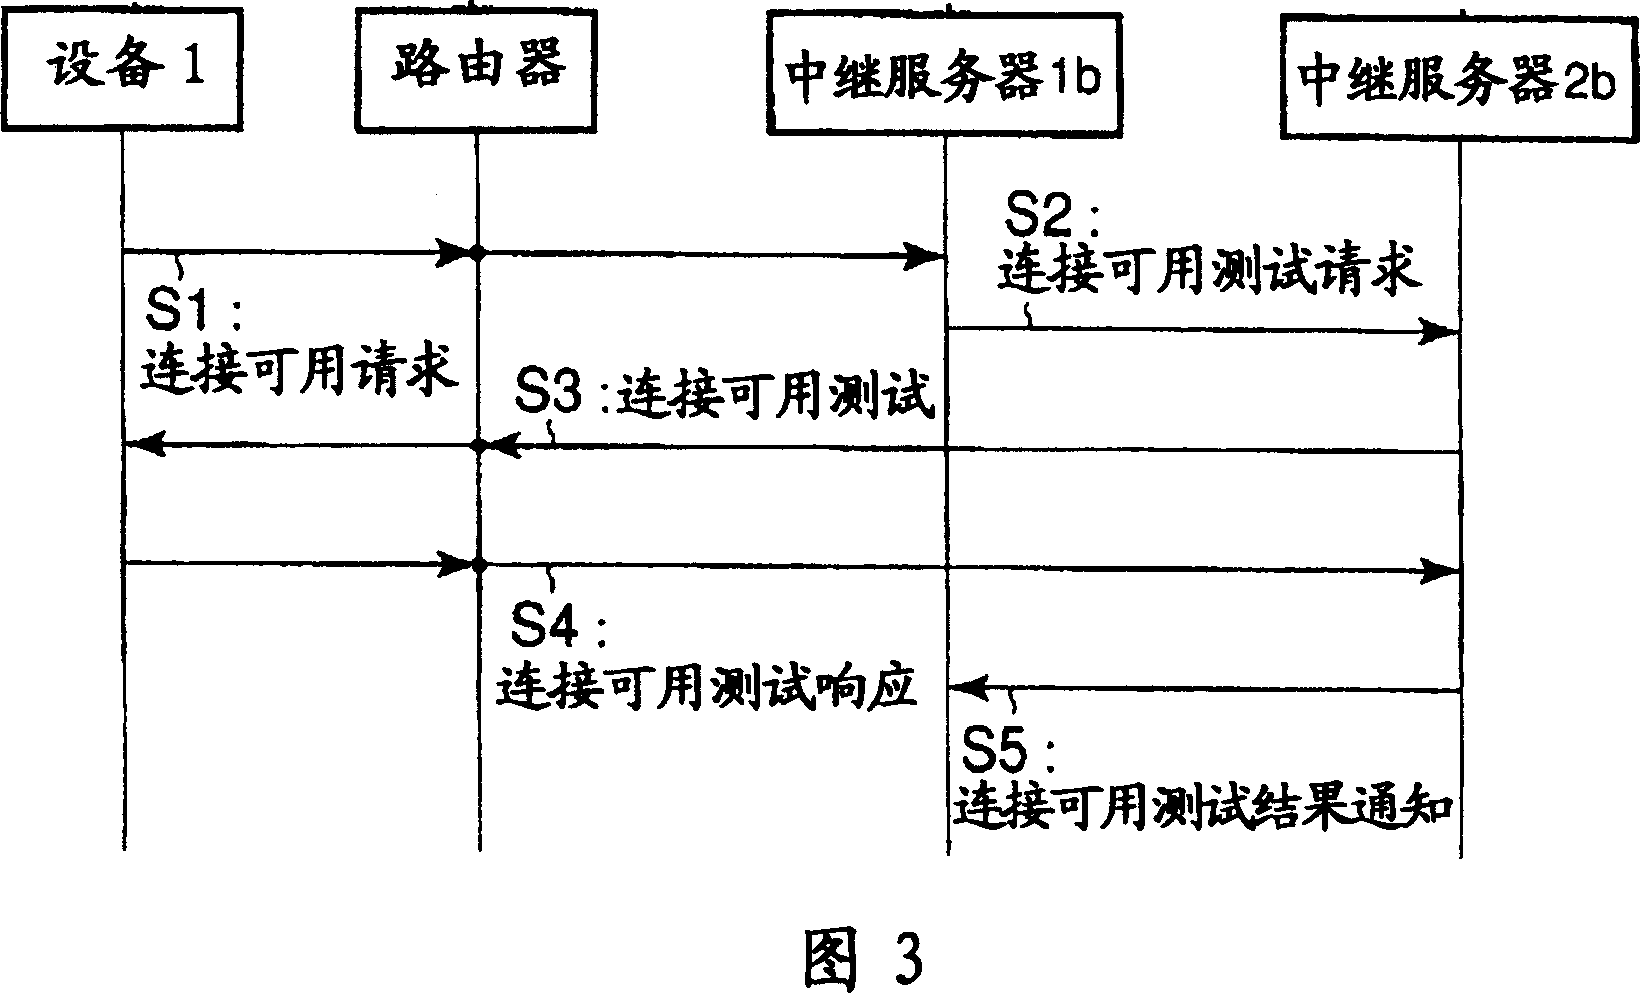 Sequential switching of relay servers according to server state